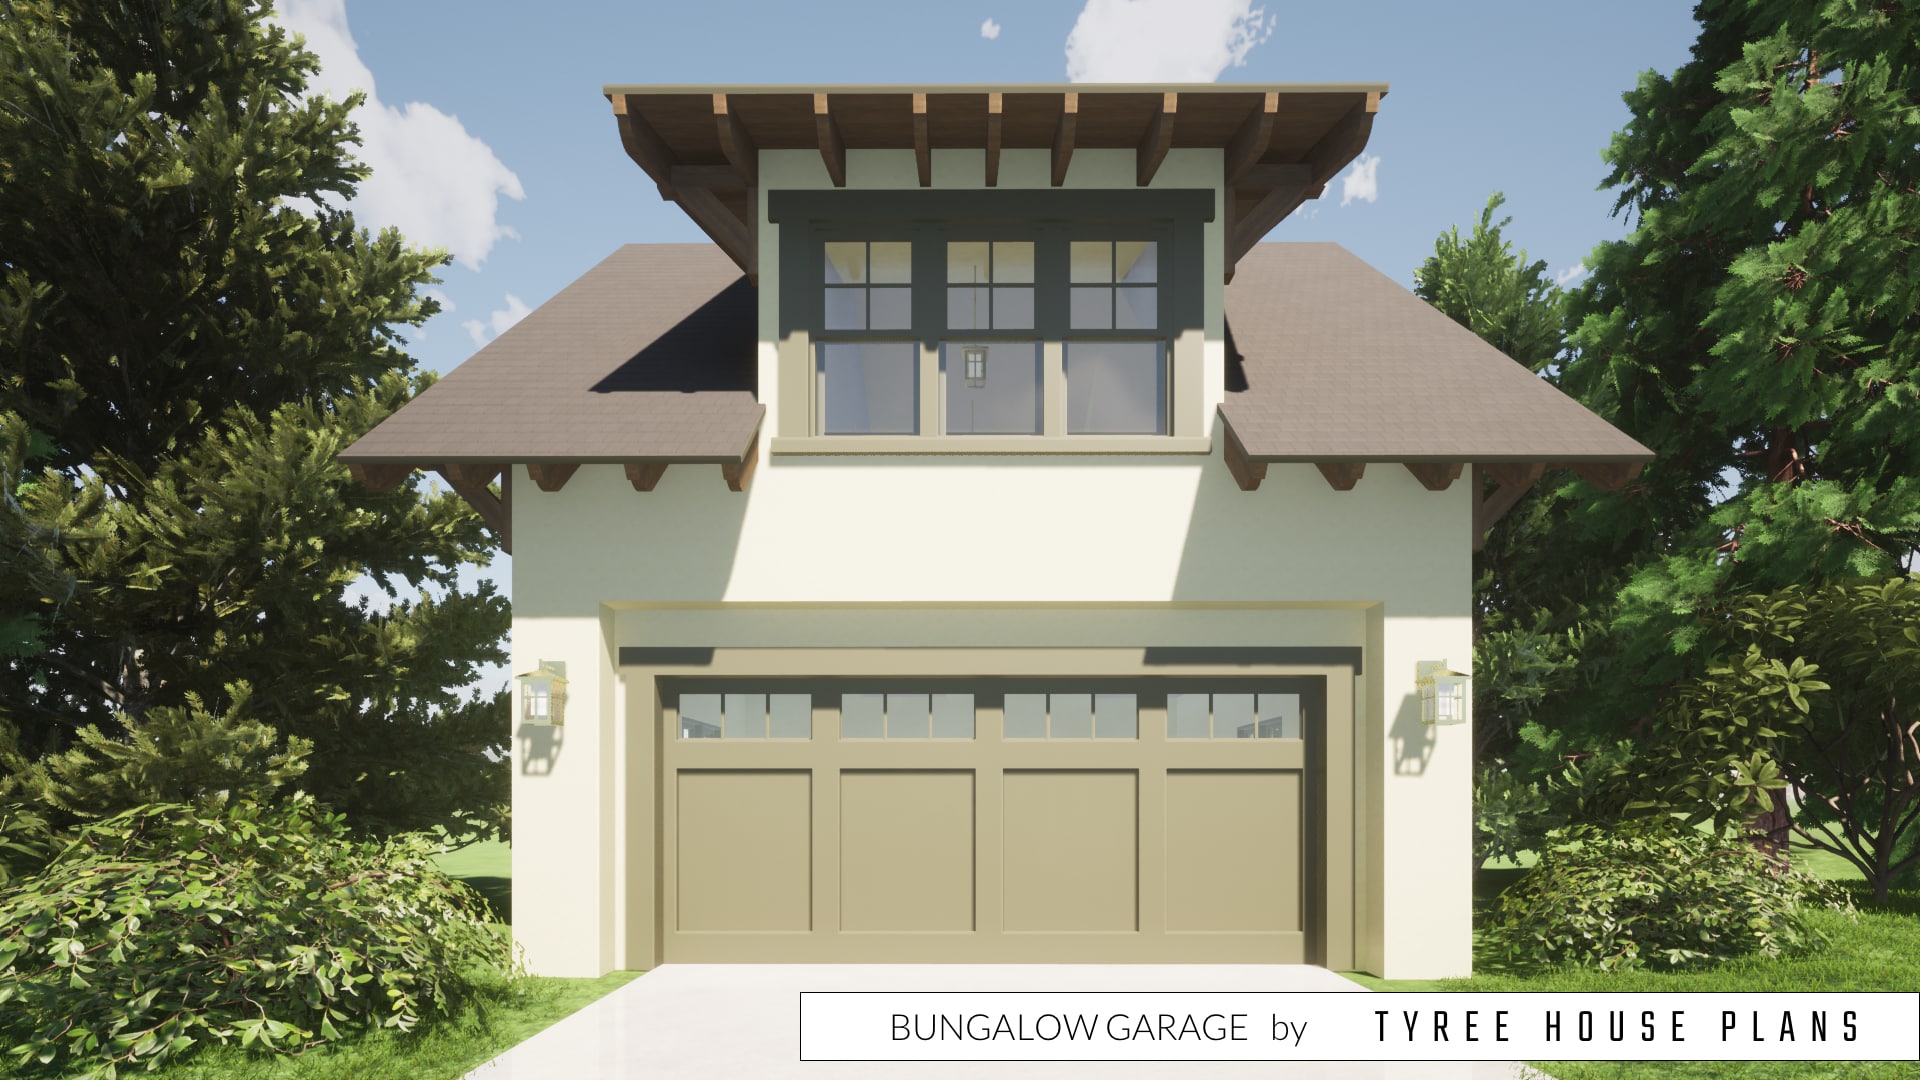 Front view. Bungalow Garage by Tyree House Plans.